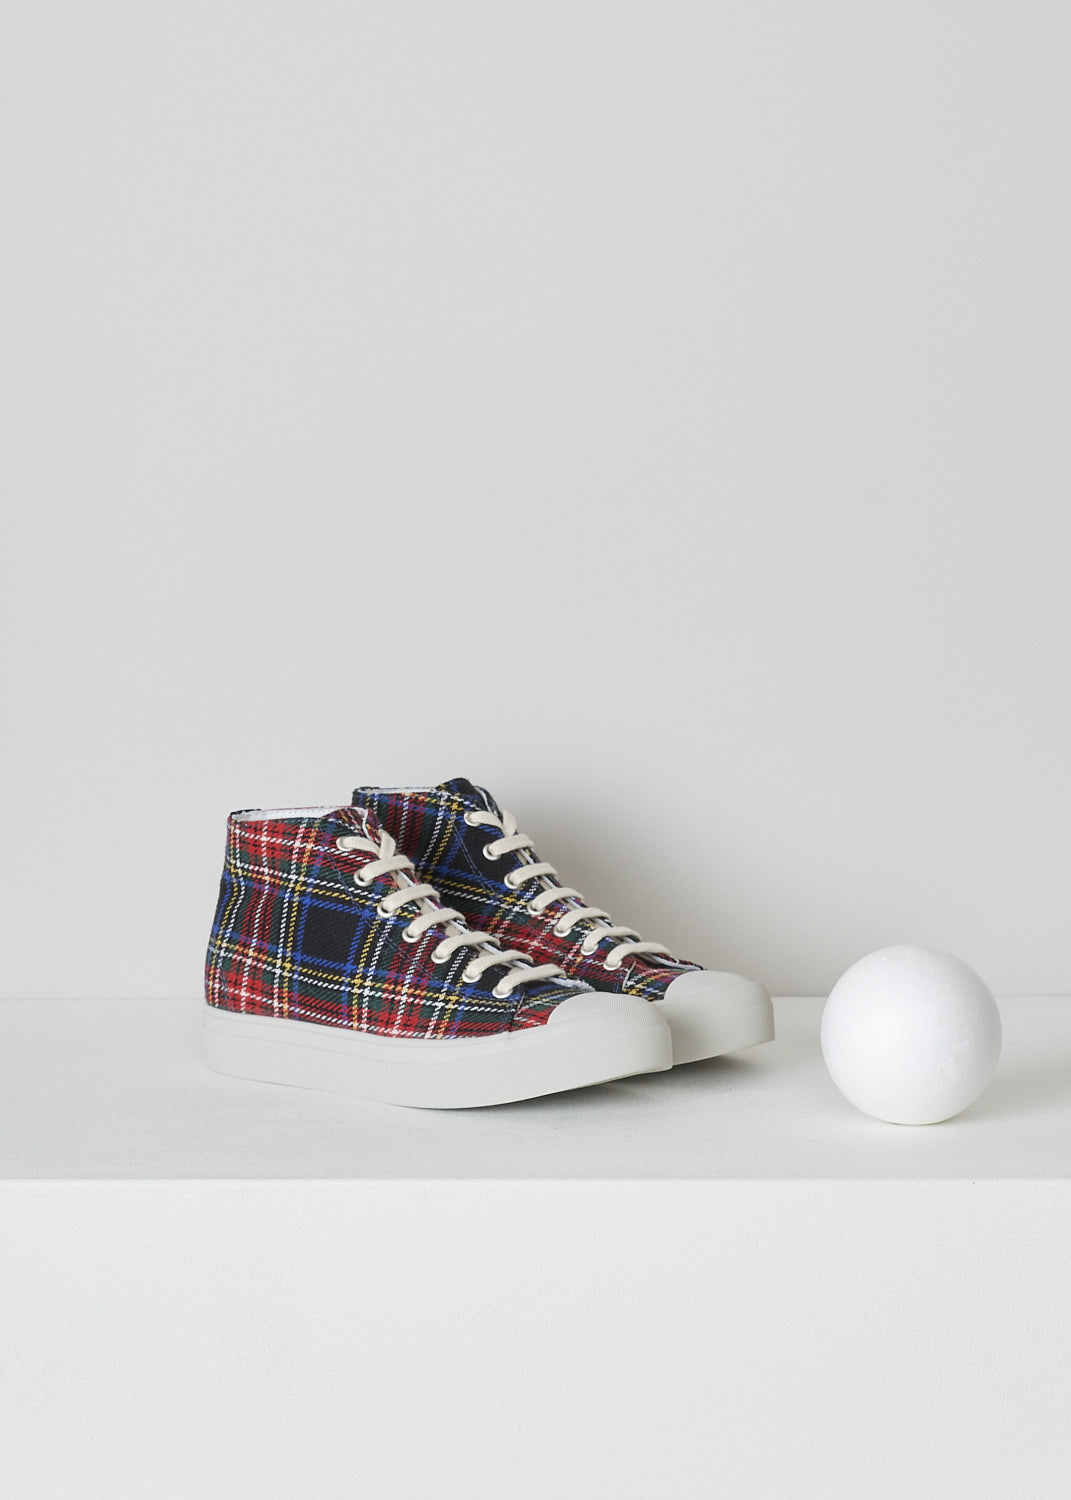 SOFIE Dâ€™HOORE, RED AND BLUE TARTAN SNEAKERS, FOSTER_WSCOT_TARTAN_4, Red, Blue, Print, Front, These high top sneakers with red and blue tartan print feature front lace-up fastening with white laces. These sneakers have a round toe with a white rubber toe cap. These shoes have white rubber soles.

